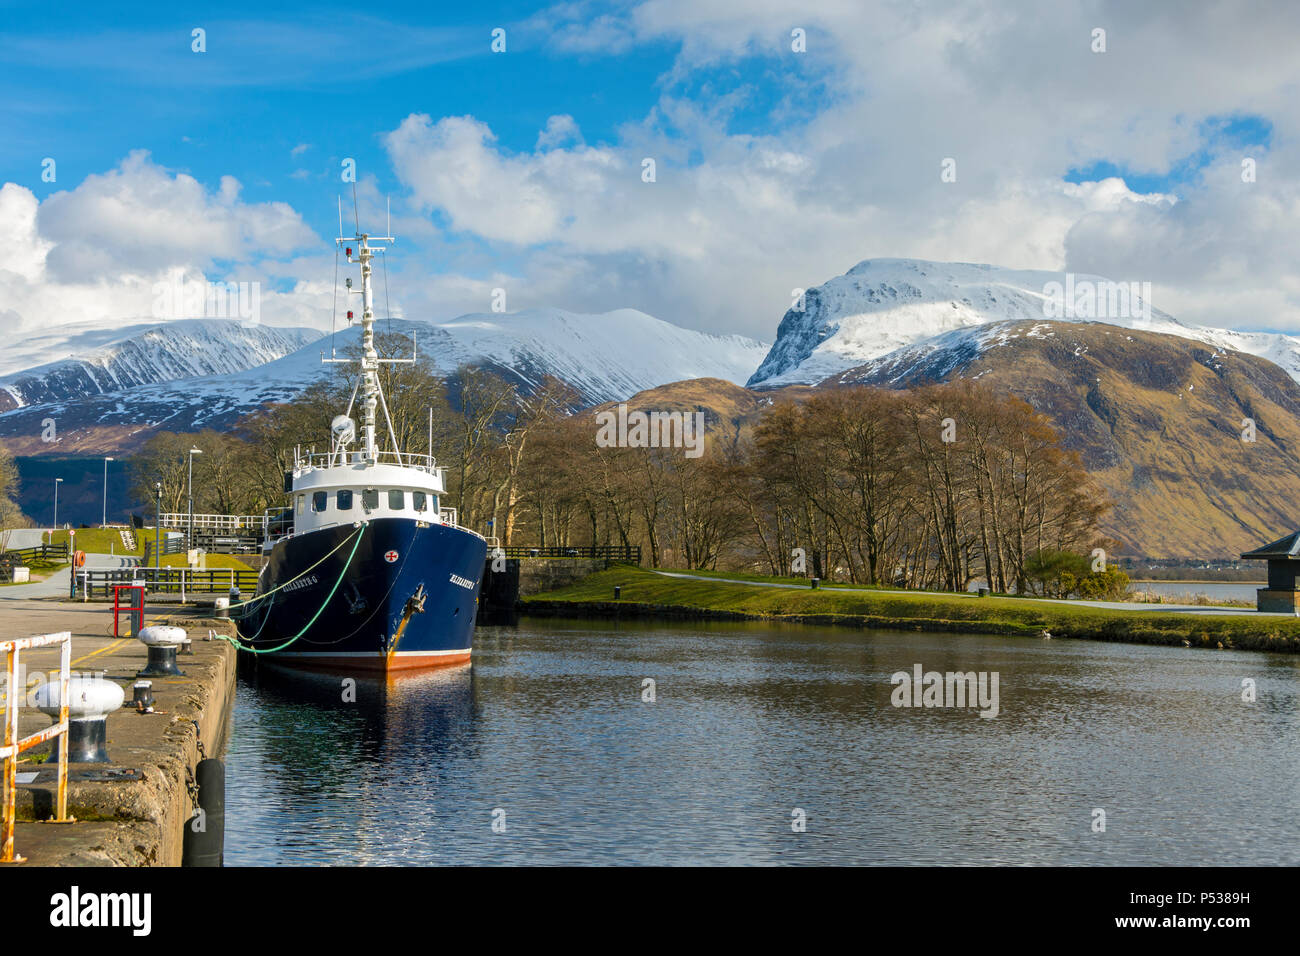 Ben Nevis from the Caledonian Canal at Corpach near Fort William, Highland Region, Scotland, UK. The boat is the Elizabeth G. Stock Photo